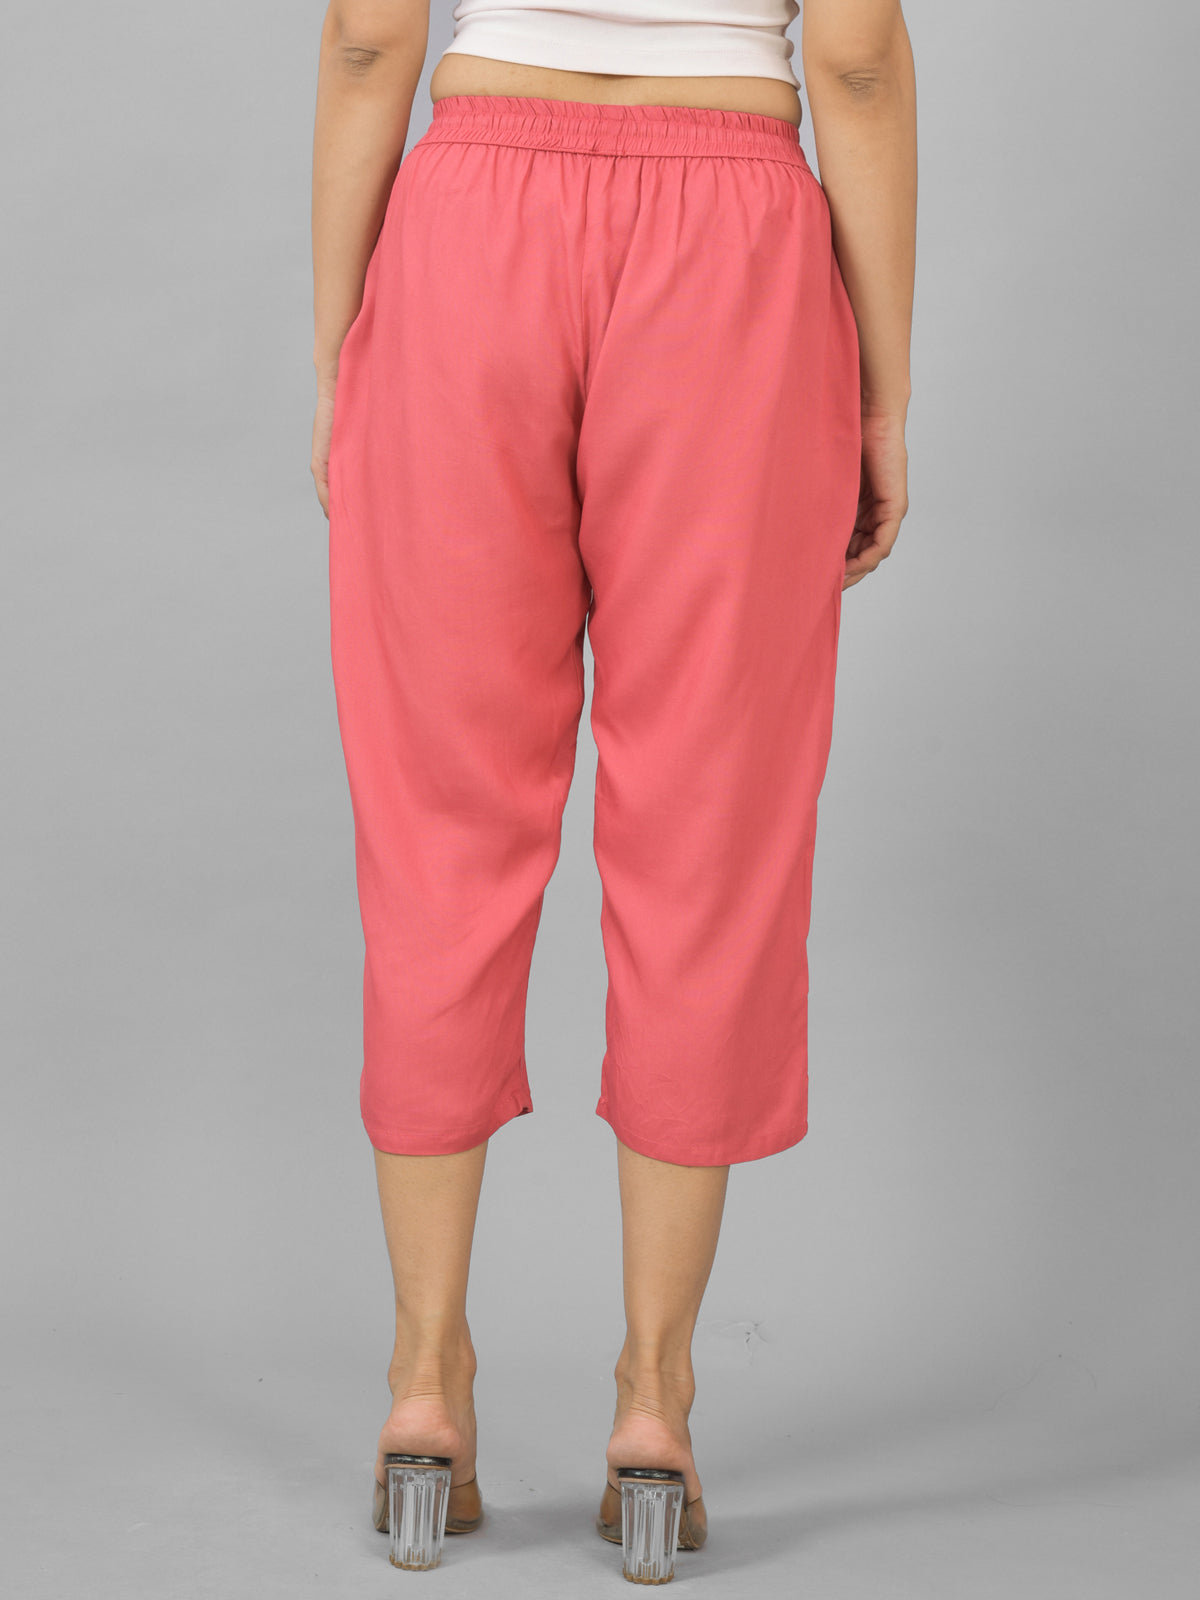 Pack Of 2 Womens Gajri And Mauve Pink Calf Length Rayon Culottes Trouser Combo